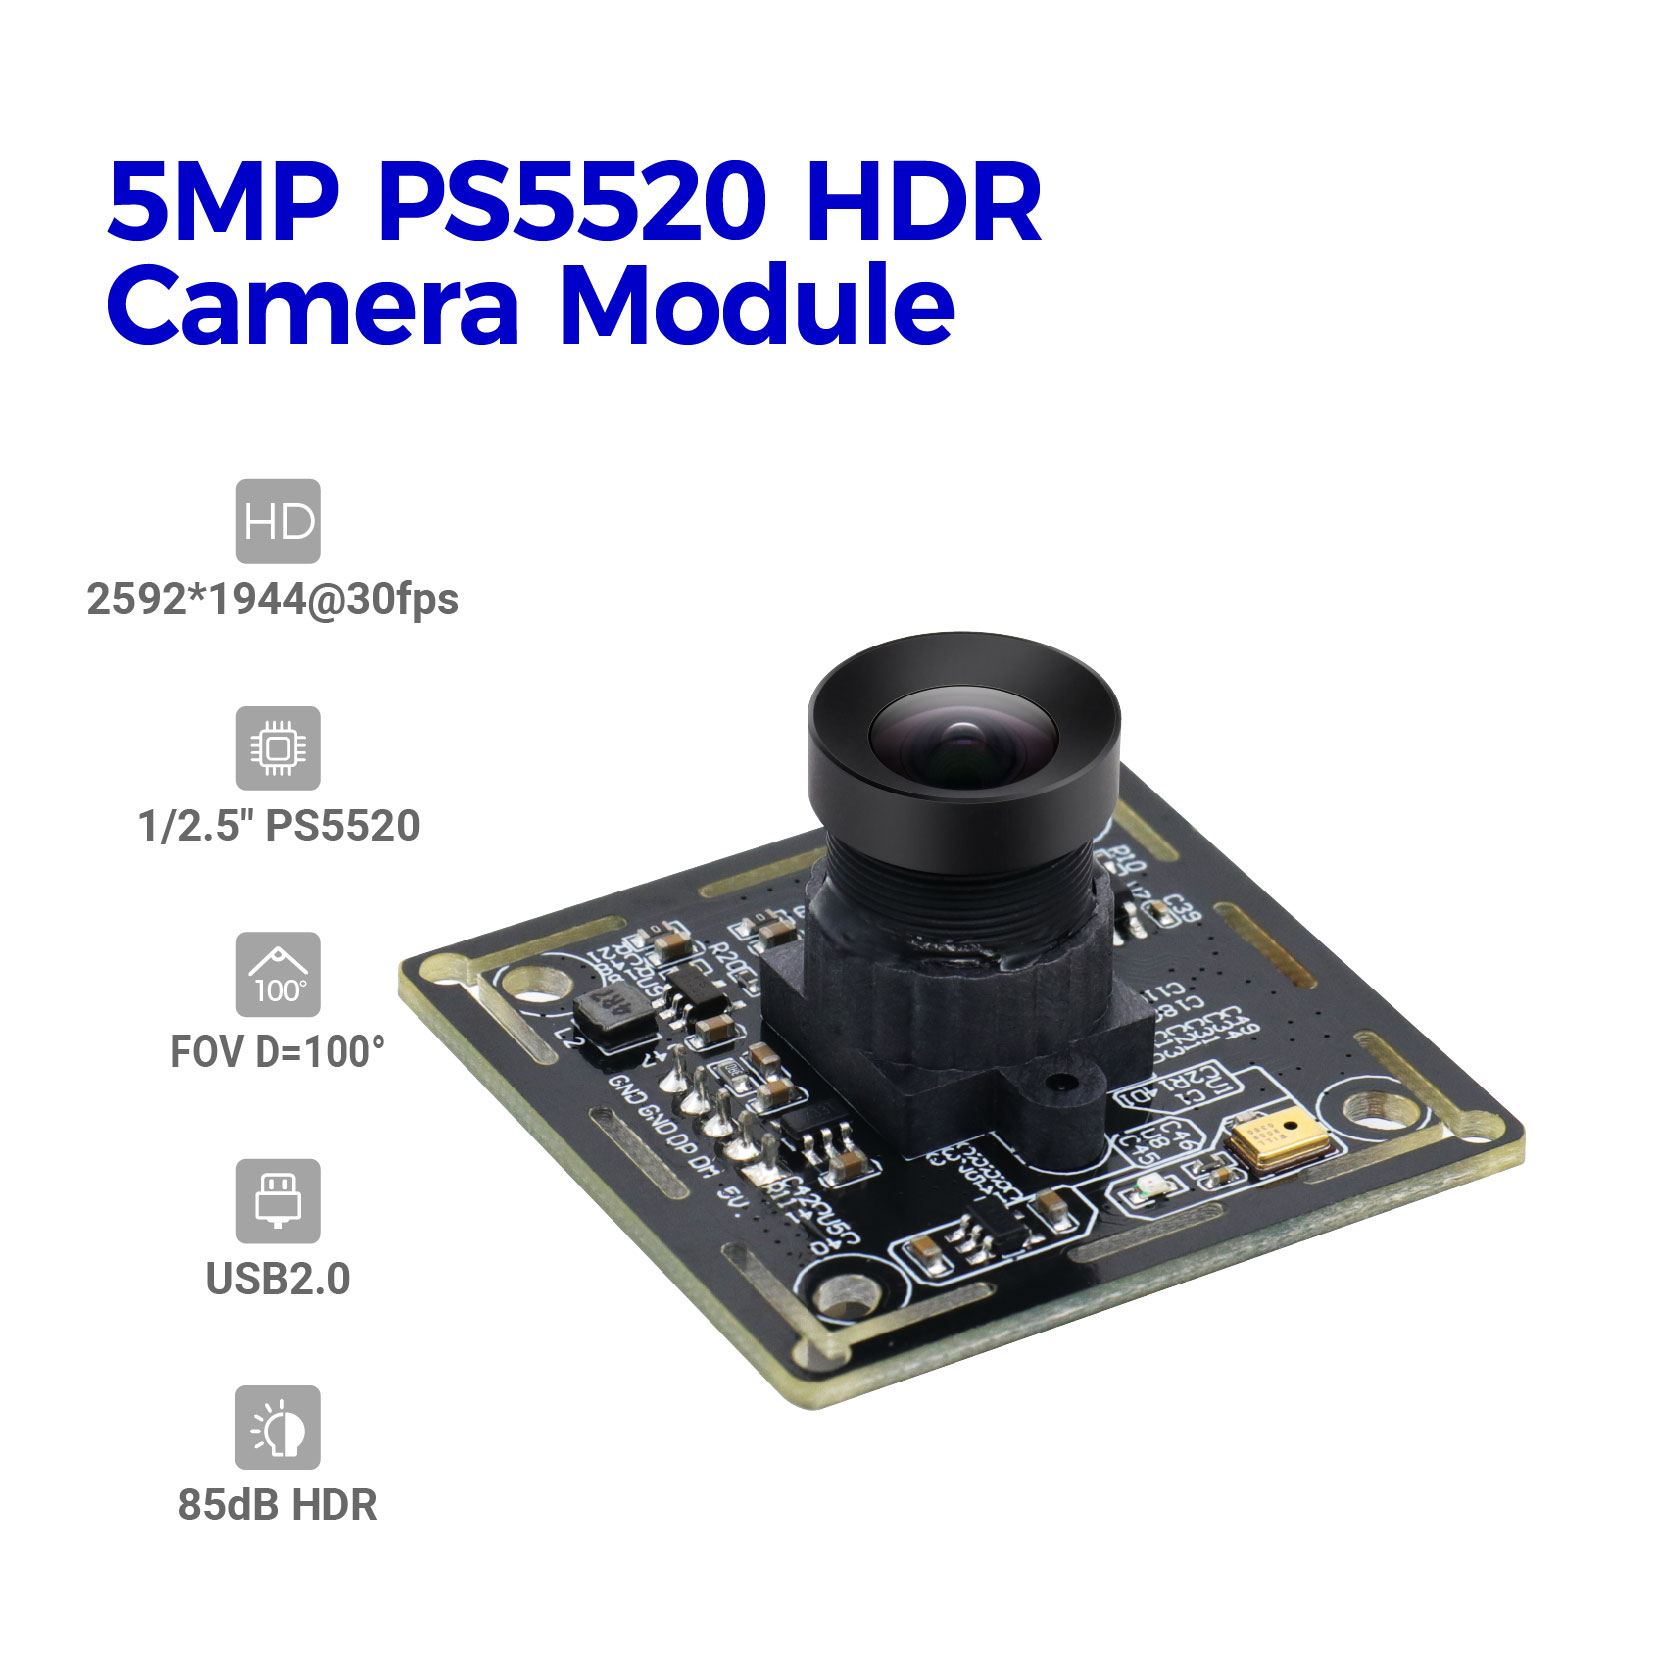 5MP PS5520 HDR 相机模块